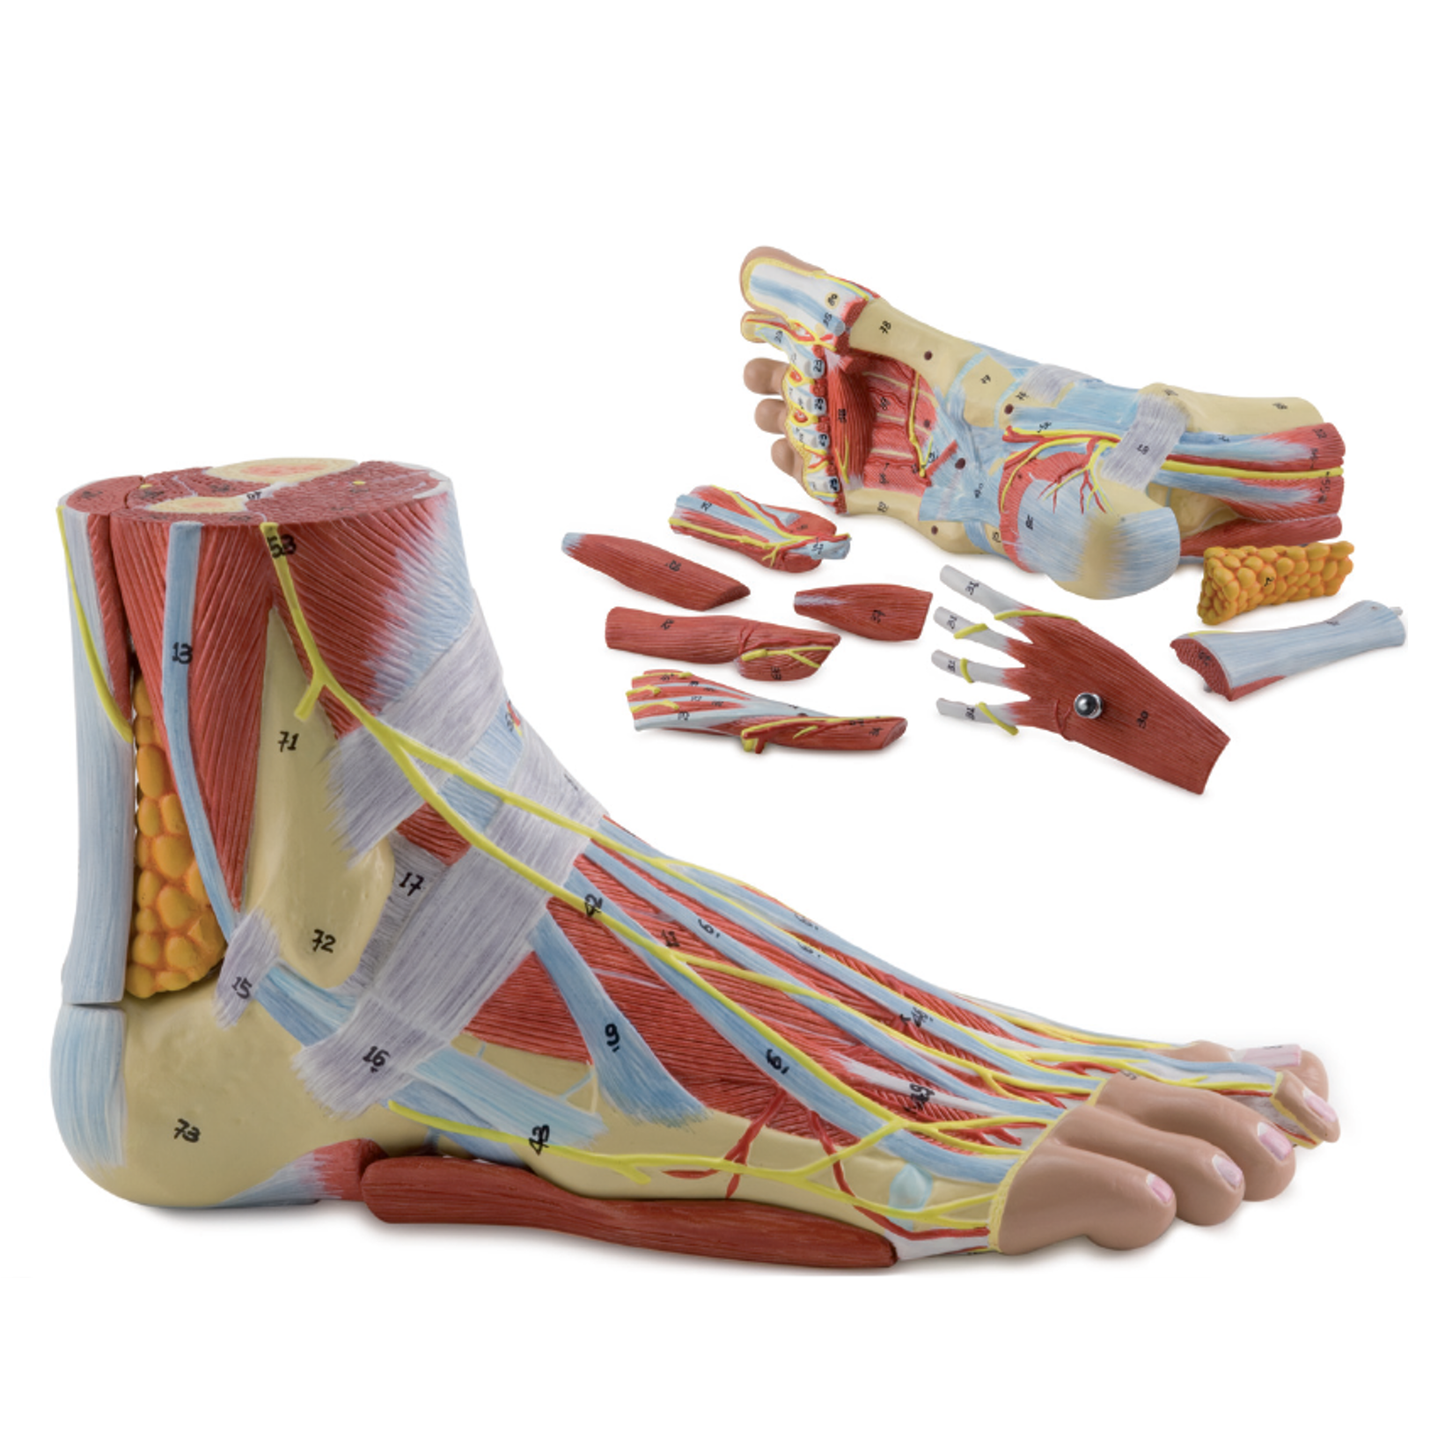 Complete foot model with ligaments, muscles, vessels and nerves - can be separated into 9 parts